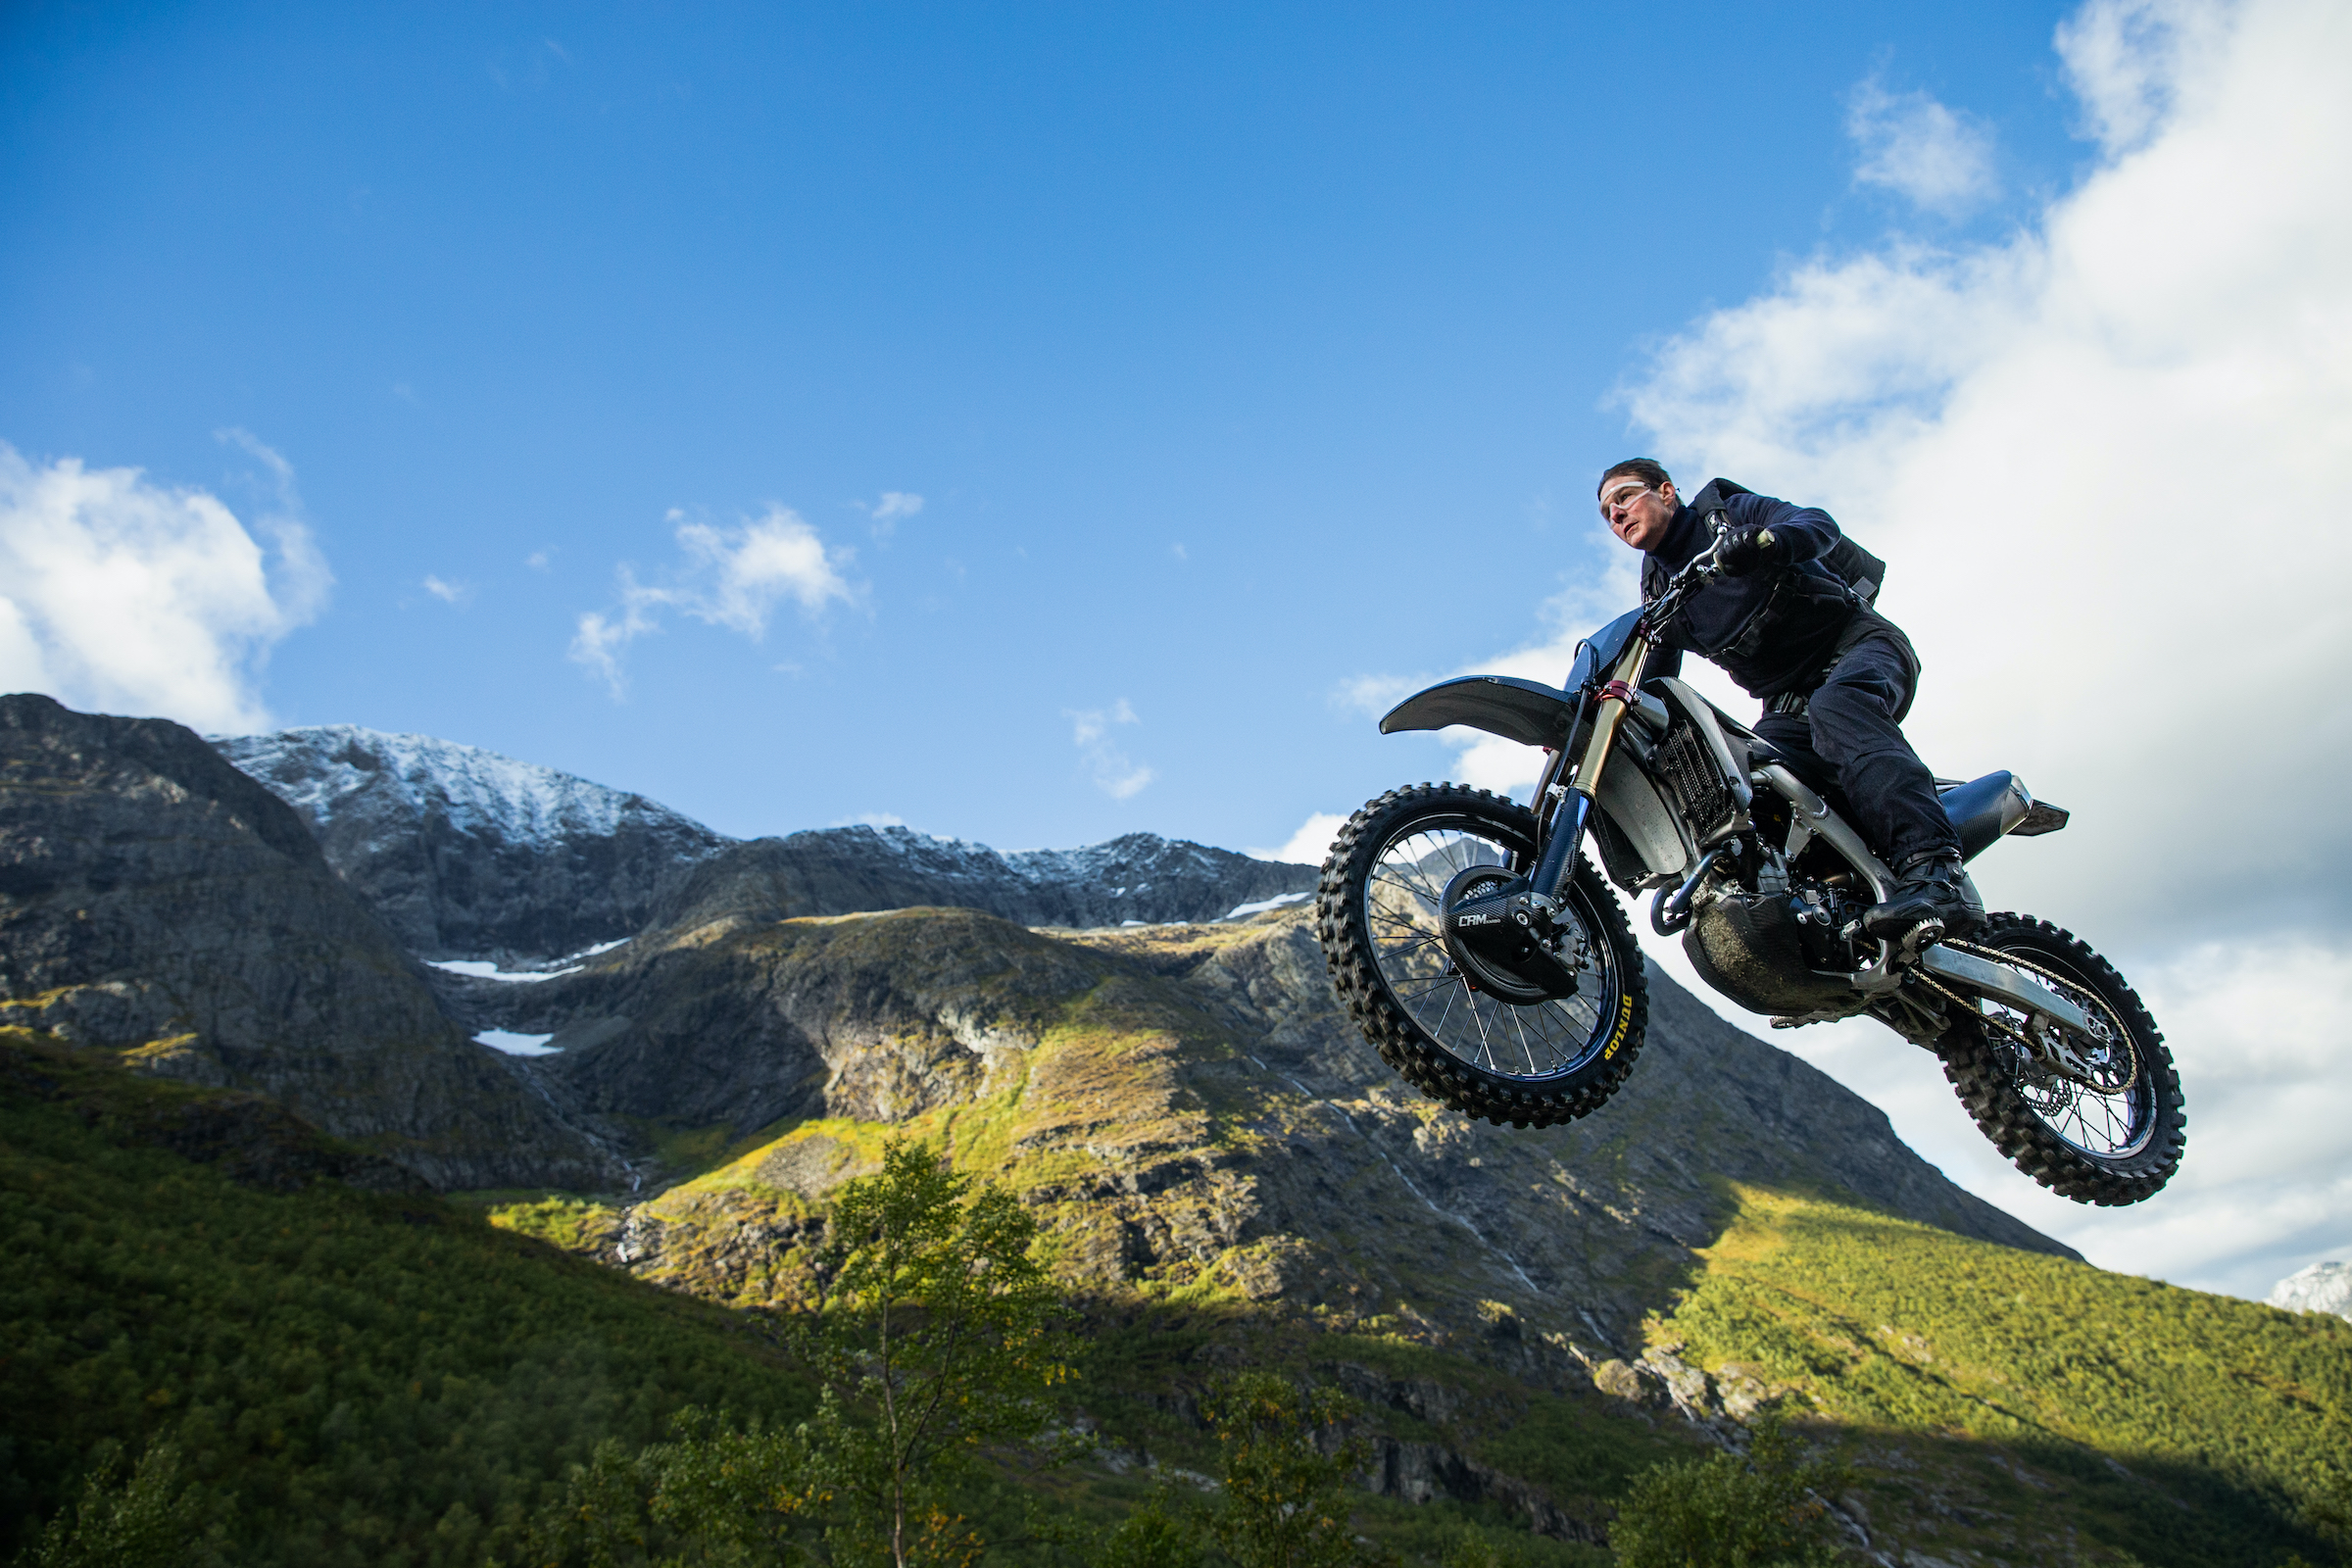 Cruise as Ethan Hunt, flying through the air on a motorcycle (Courtesy of Paramount Pictures)